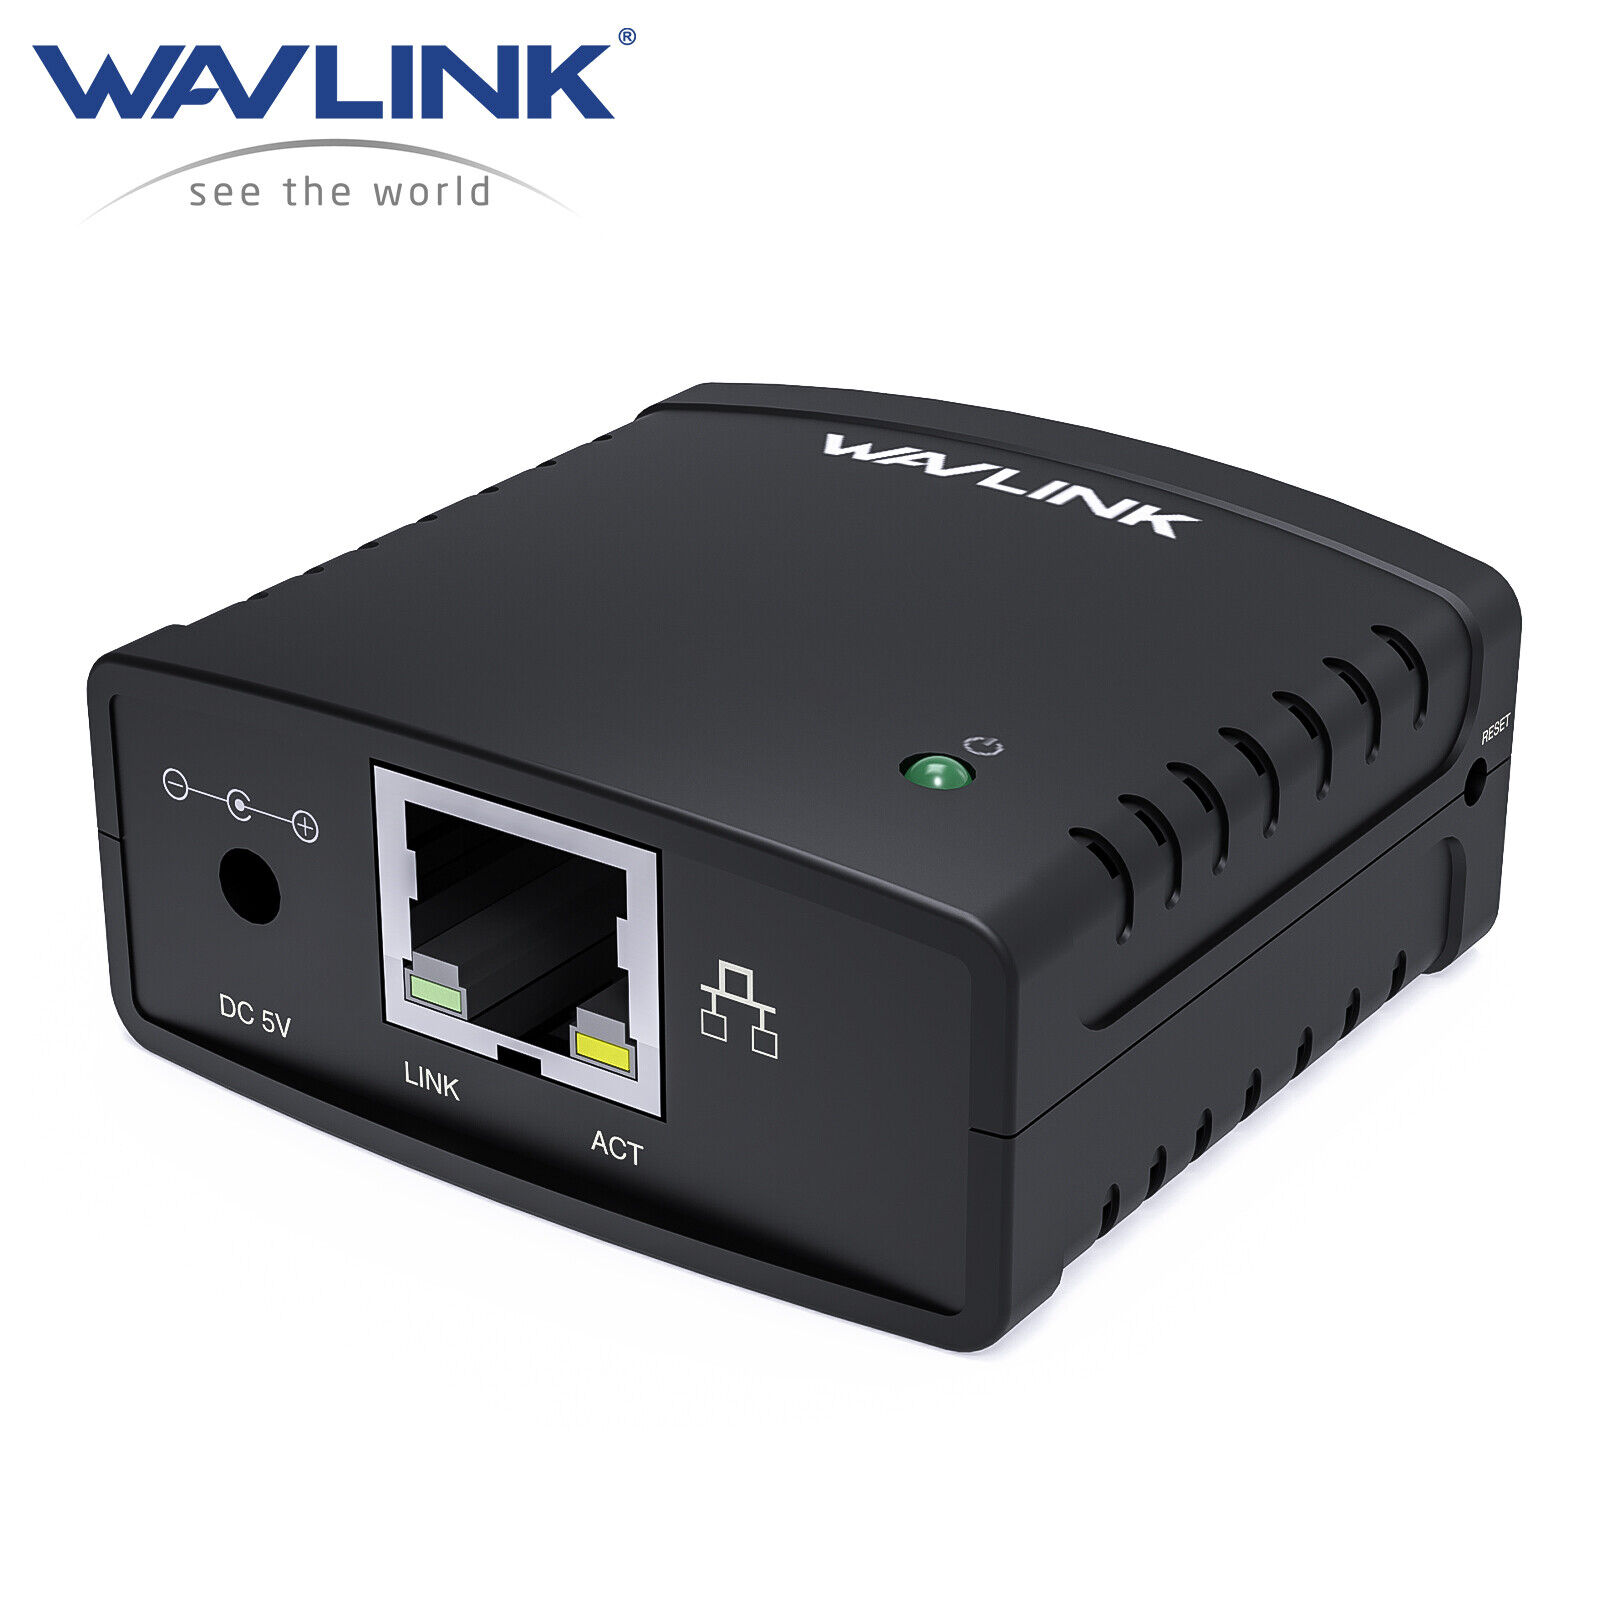 Wavlink Networking USB 2.0 Print Server | Connect USB Printer To A Network 